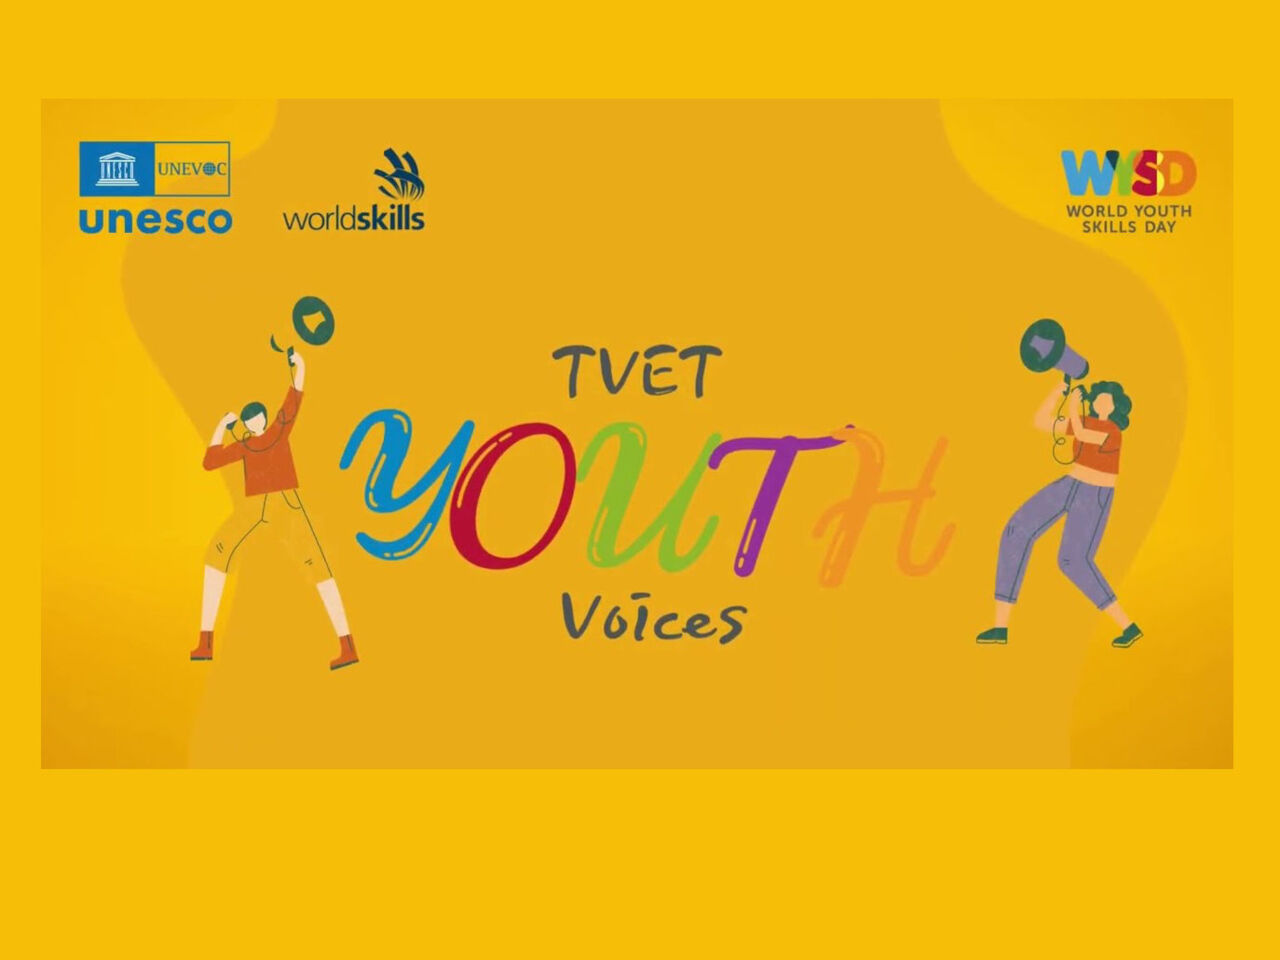 Watch videos from WorldSkills and UNESCO-UNEVOC event to celebrate World Youth Skills Day